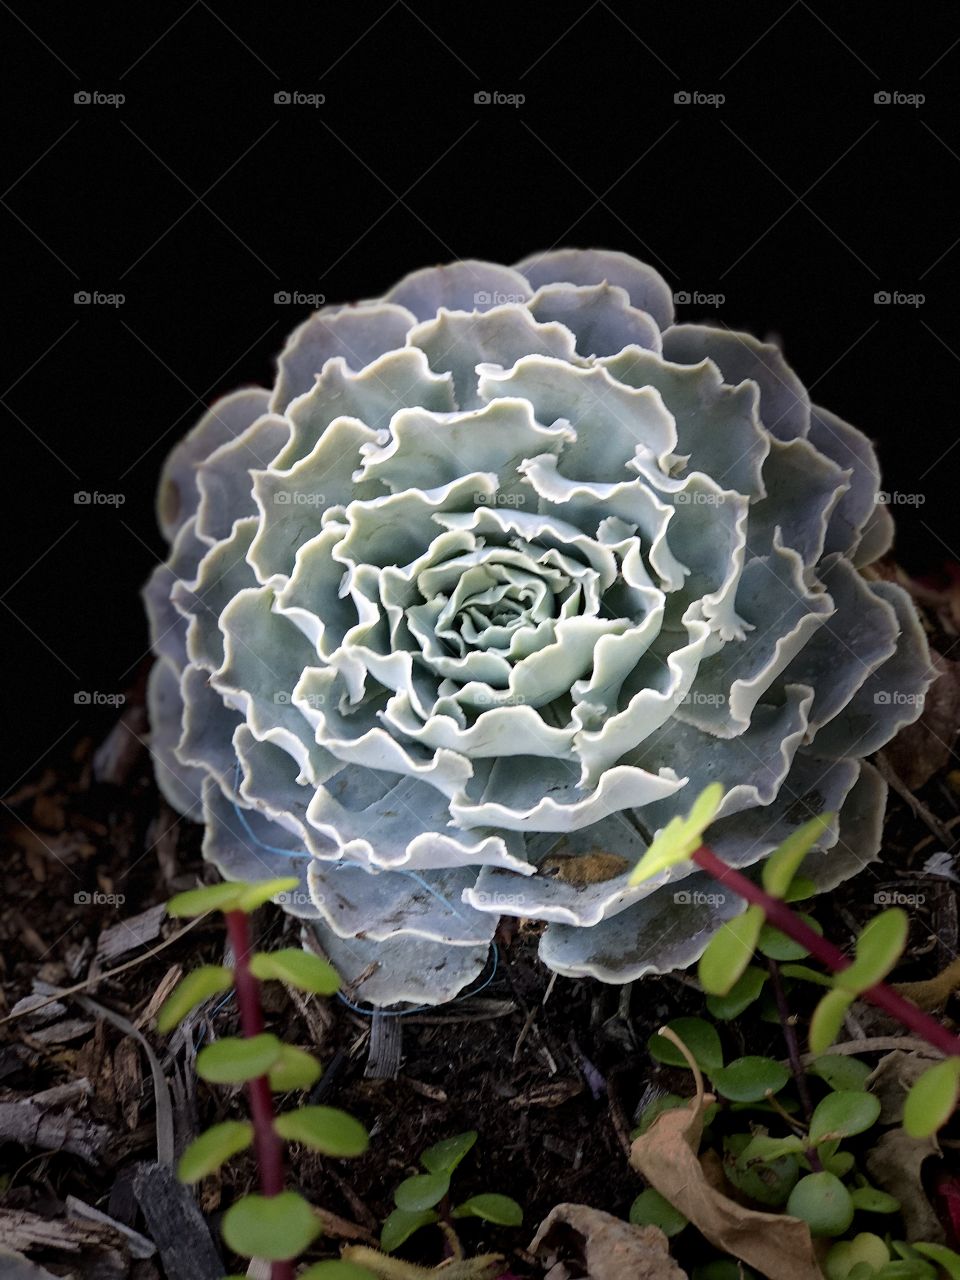 Dramatic, Beautiful and Colorful Succulents and Cactus . Perfect for Canvas Art, Metal Art, Botanical Art , Greeting Cards, Screensavers, Landscape Marketing.